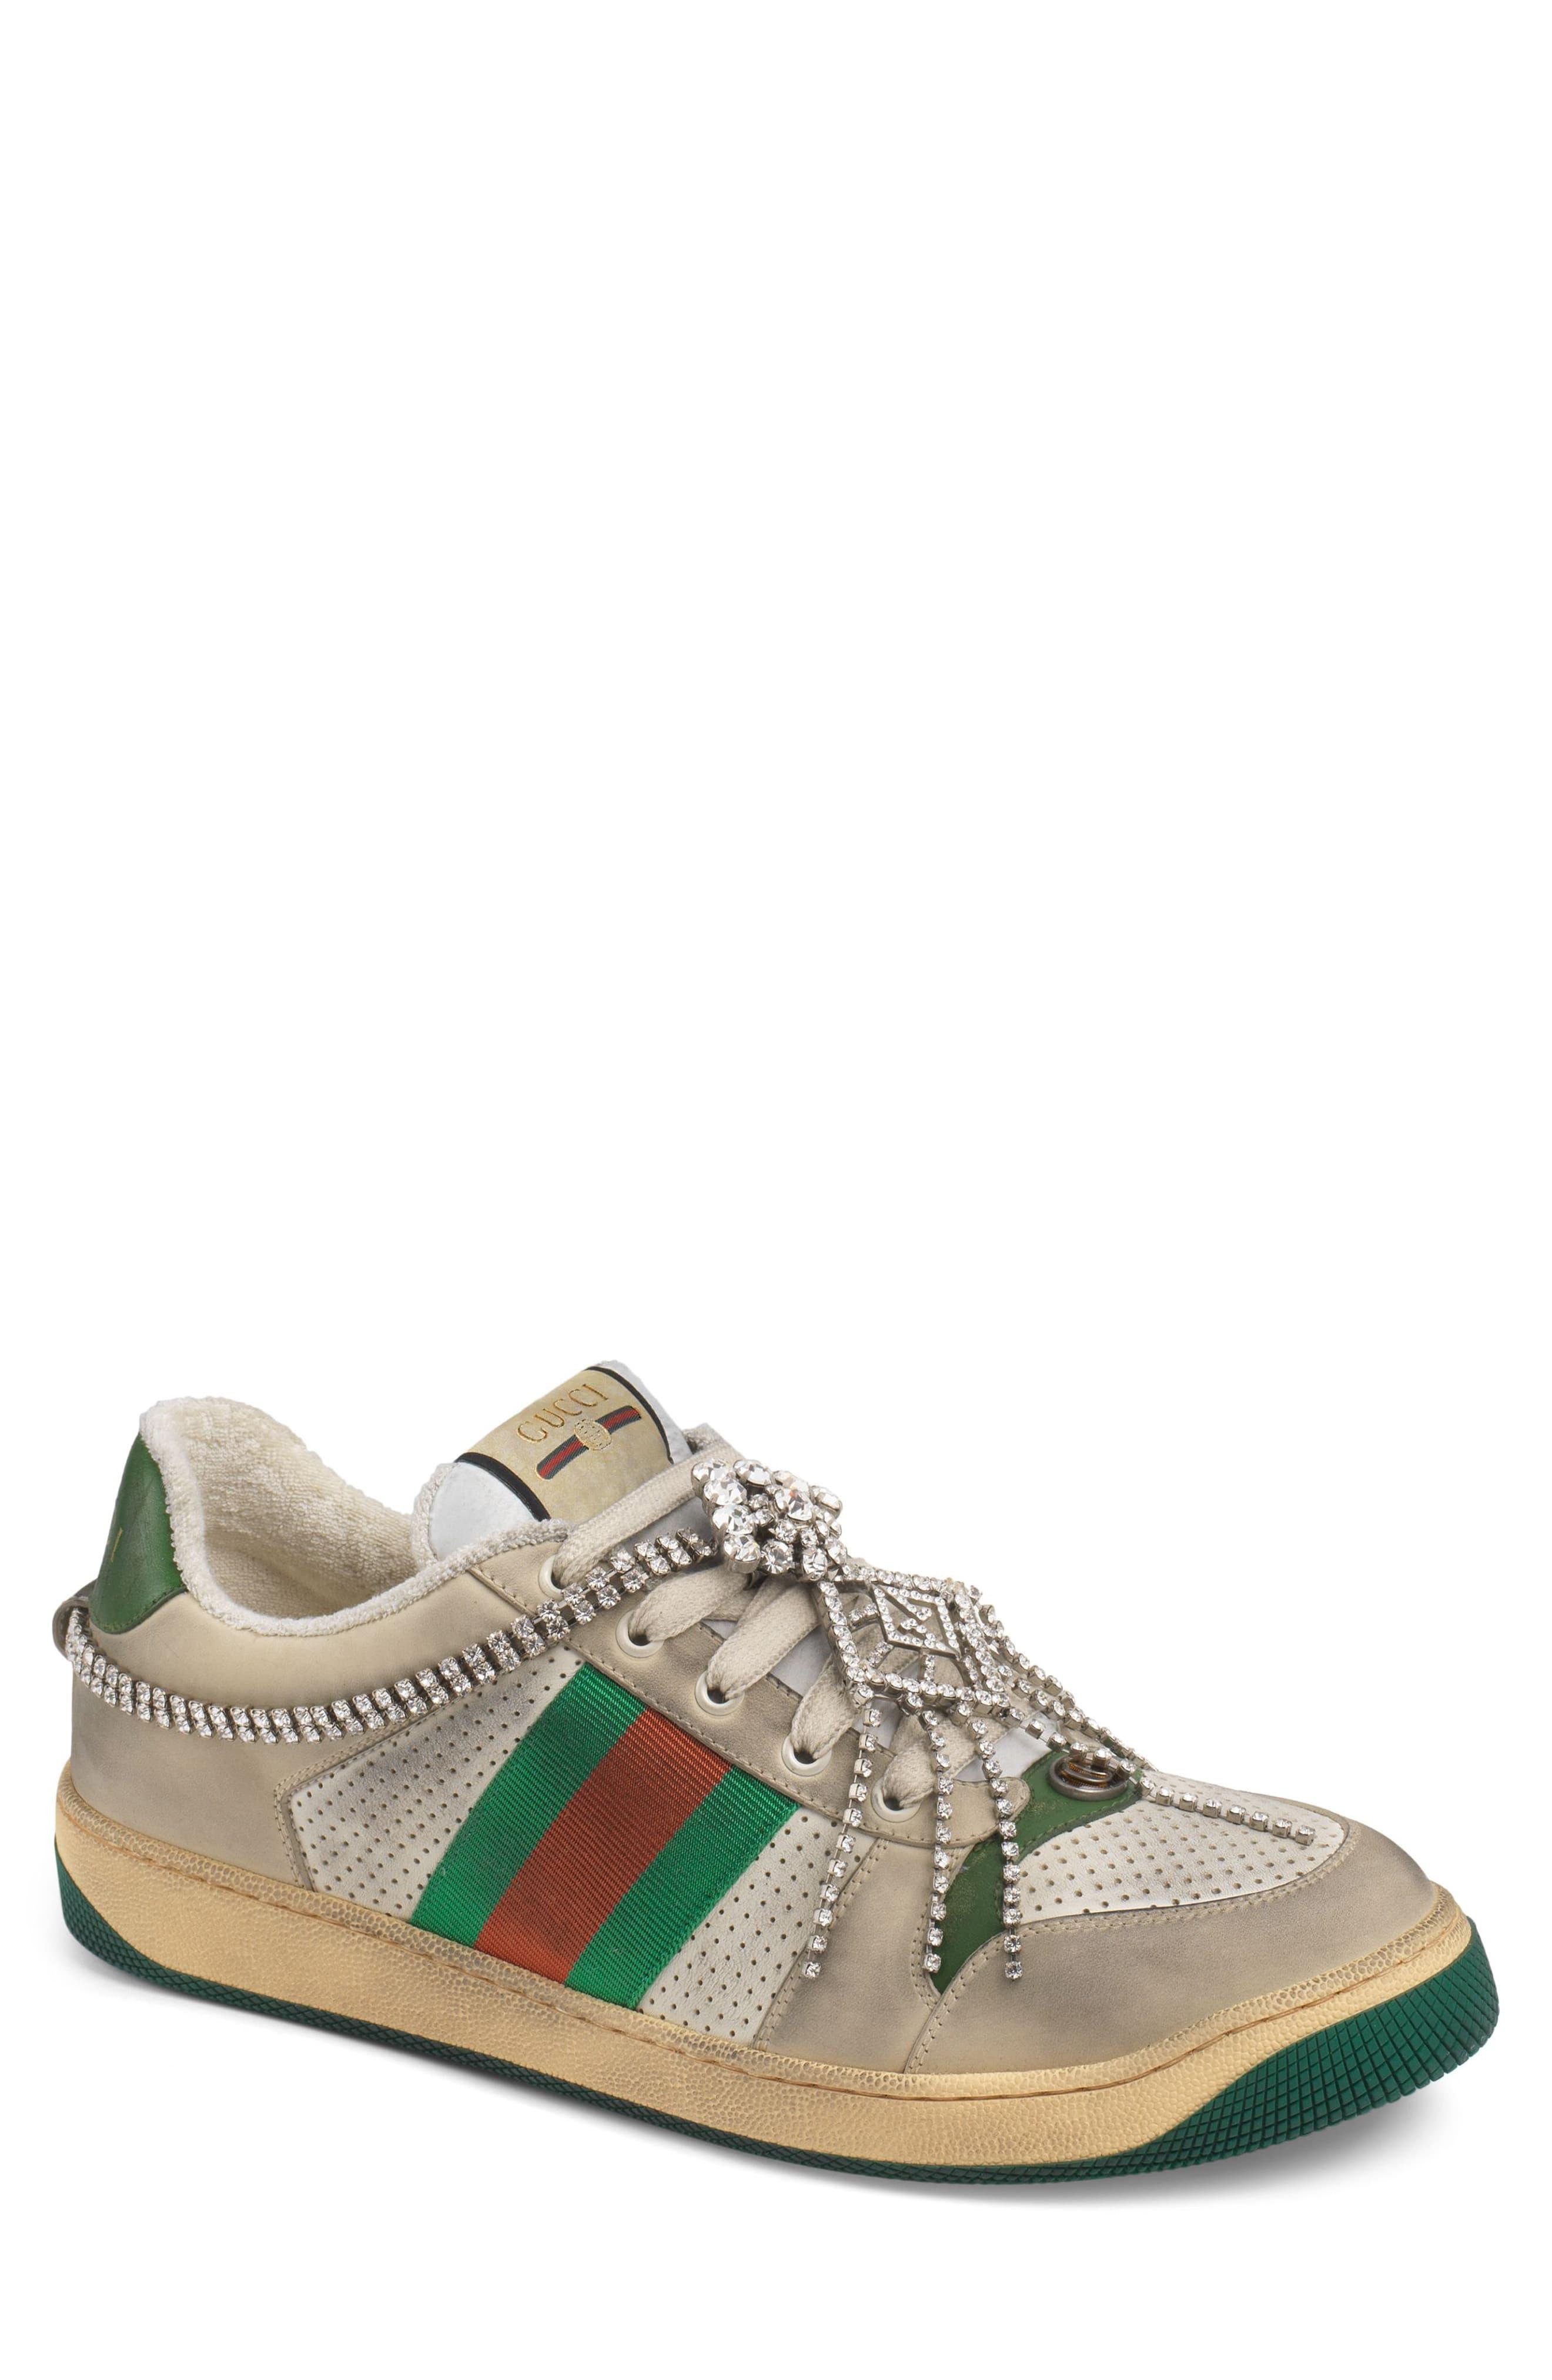 jeweled gucci sneakers